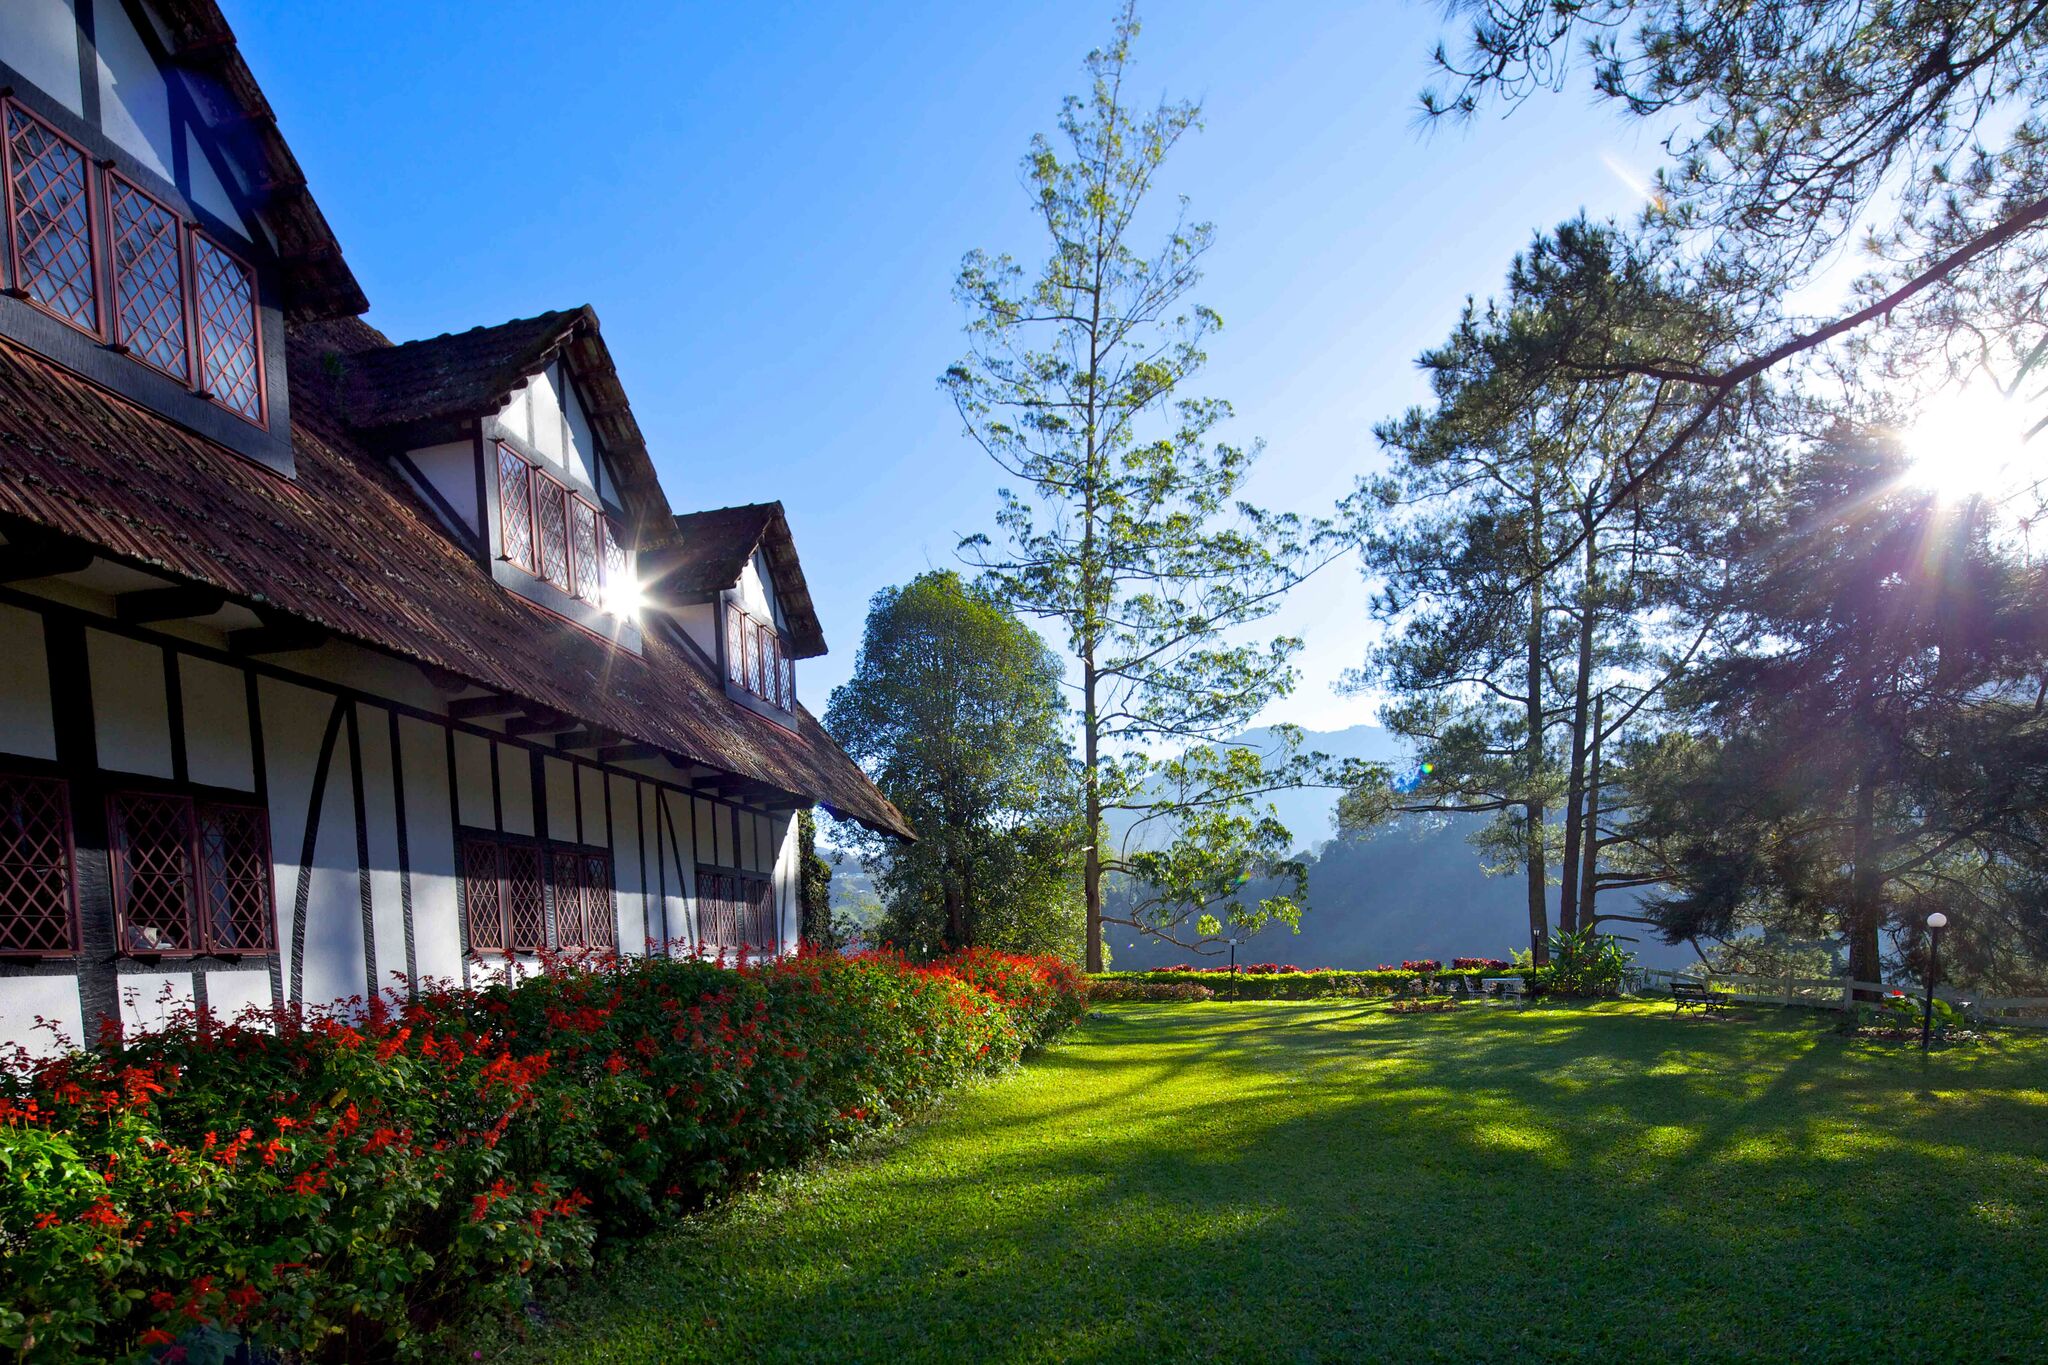 Go on a Digital Detox at The Lakehouse Cameron Highlands